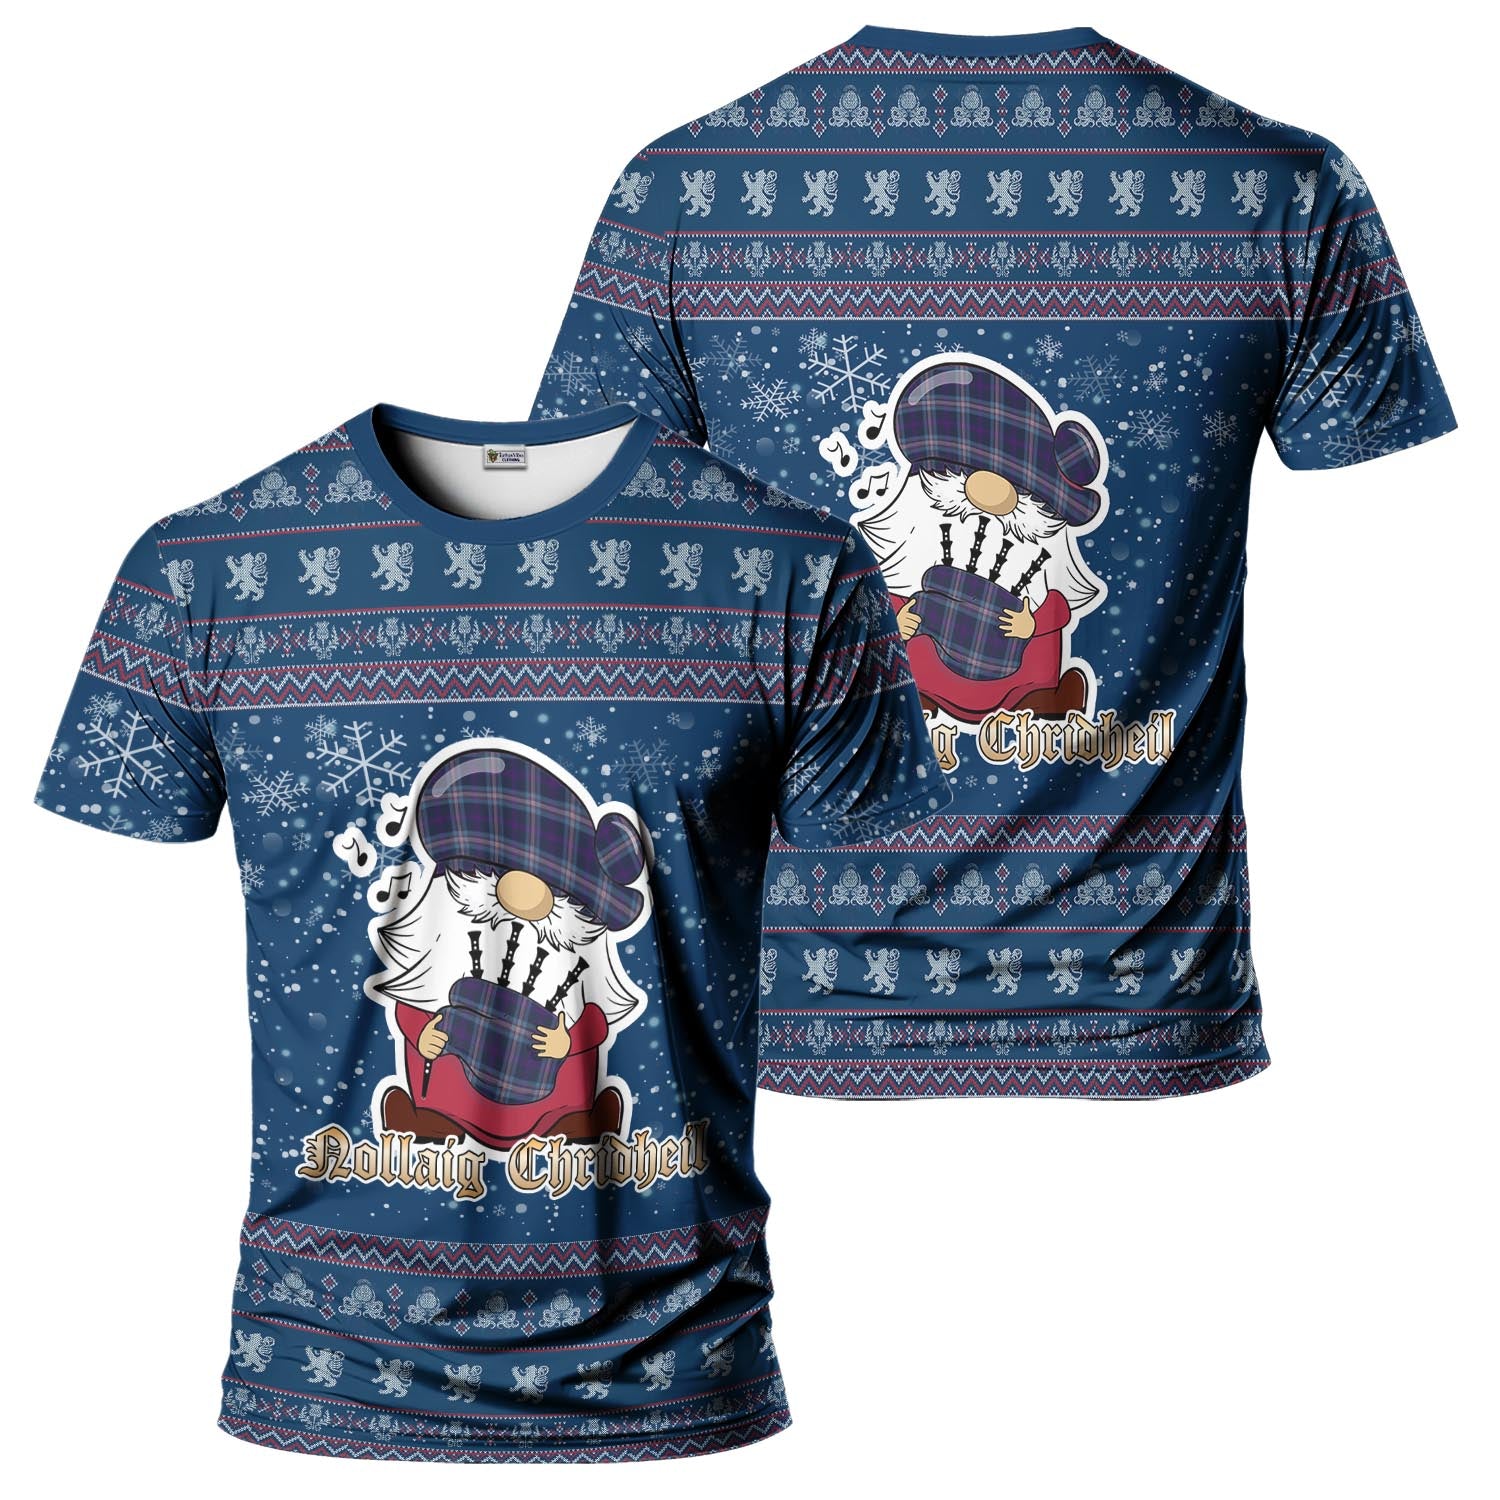 Nevoy Clan Christmas Family T-Shirt with Funny Gnome Playing Bagpipes Kid's Shirt Blue - Tartanvibesclothing